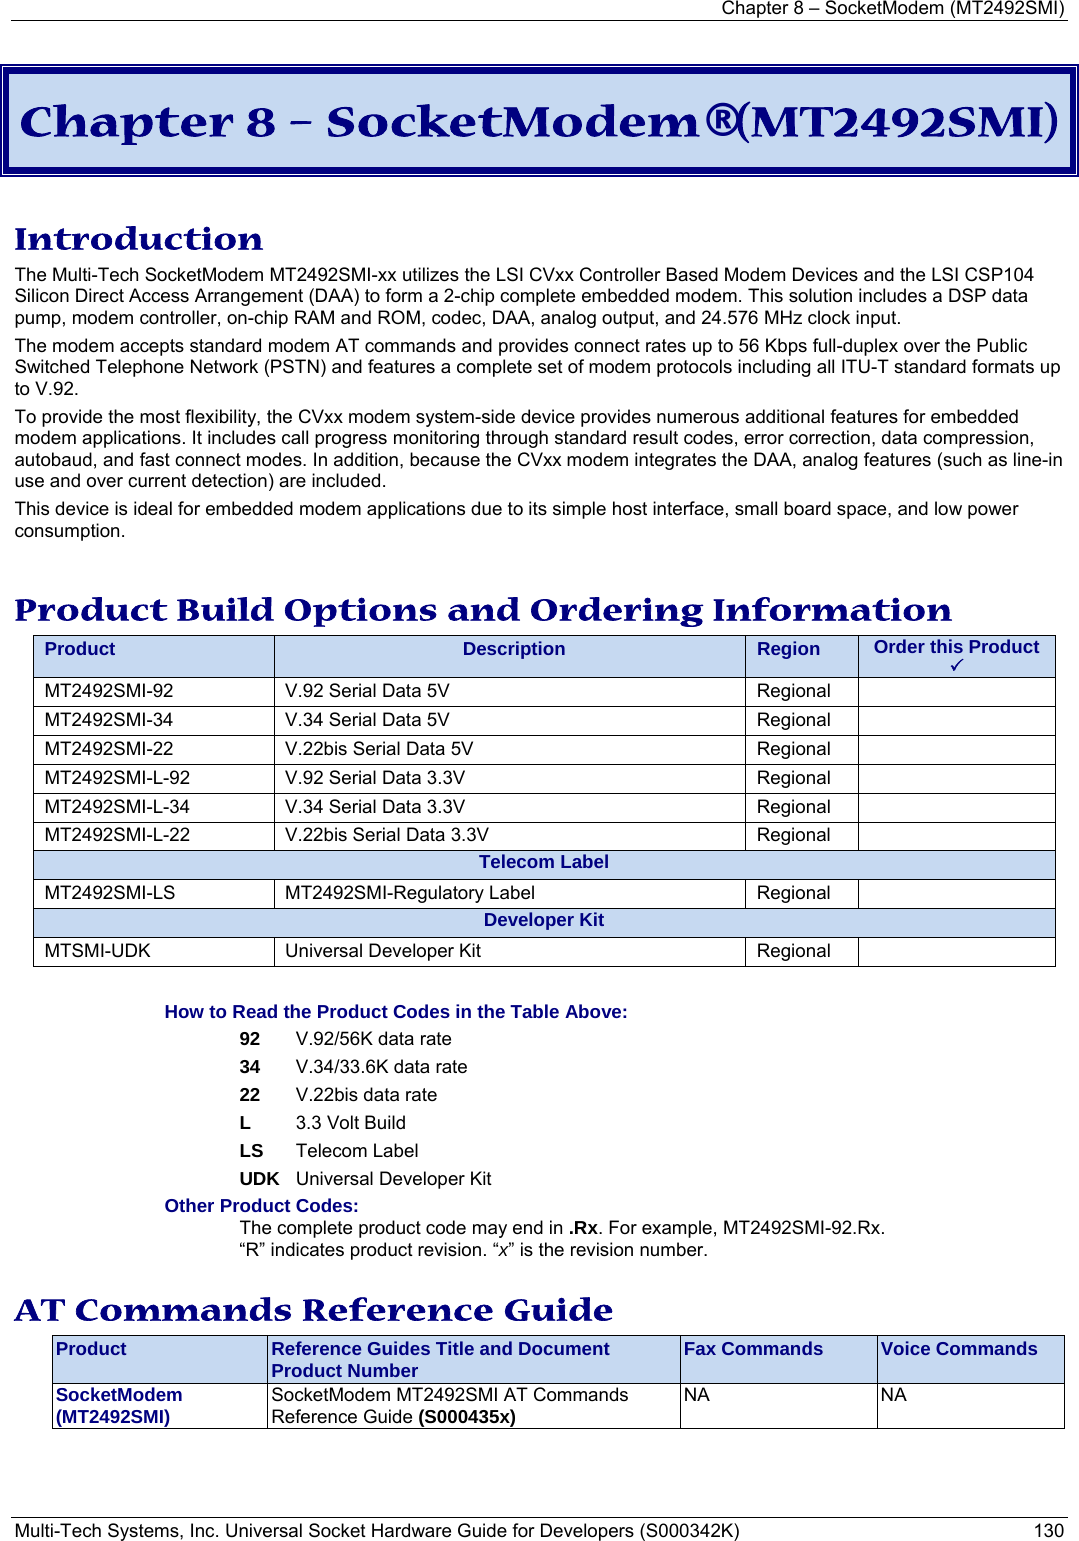 Chapter 8 – SocketModem (MT2492SMI) Multi-Tech Systems, Inc. Universal Socket Hardware Guide for Developers (S000342K)  130   Chapter 8 – SocketModem® (MT2492SMI)  Introduction The Multi-Tech SocketModem MT2492SMI-xx utilizes the LSI CVxx Controller Based Modem Devices and the LSI CSP104 Silicon Direct Access Arrangement (DAA) to form a 2-chip complete embedded modem. This solution includes a DSP data pump, modem controller, on-chip RAM and ROM, codec, DAA, analog output, and 24.576 MHz clock input.  The modem accepts standard modem AT commands and provides connect rates up to 56 Kbps full-duplex over the Public Switched Telephone Network (PSTN) and features a complete set of modem protocols including all ITU-T standard formats up to V.92.  To provide the most flexibility, the CVxx modem system-side device provides numerous additional features for embedded modem applications. It includes call progress monitoring through standard result codes, error correction, data compression, autobaud, and fast connect modes. In addition, because the CVxx modem integrates the DAA, analog features (such as line-in use and over current detection) are included.  This device is ideal for embedded modem applications due to its simple host interface, small board space, and low power consumption.   Product Build Options and Ordering Information Product  Description  Region  Order this Product 3MT2492SMI-92  V.92 Serial Data 5V           Regional MT2492SMI-34  V.34 Serial Data 5V           Regional MT2492SMI-22  V.22bis Serial Data 5V       Regional MT2492SMI-L-92  V.92 Serial Data 3.3V       Regional   MT2492SMI-L-34  V.34 Serial Data 3.3V       Regional   MT2492SMI-L-22  V.22bis Serial Data 3.3V        Regional   Telecom Label MT2492SMI-LS MT2492SMI-Regulatory Label  Regional  Developer KitMTSMI-UDK  Universal Developer Kit  Regional    How to Read the Product Codes in the Table Above: 92  V.92/56K data rate 34  V.34/33.6K data rate 22  V.22bis data rate L  3.3 Volt Build LS Telecom Label UDK  Universal Developer Kit Other Product Codes: The complete product code may end in .Rx. For example, MT2492SMI-92.Rx.   “R” indicates product revision. “x” is the revision number.  AT Commands Reference Guide Product  Reference Guides Title and Document Product Number  Fax Commands  Voice Commands SocketModem  (MT2492SMI)  SocketModem MT2492SMI AT Commands Reference Guide (S000435x)   NA NA    